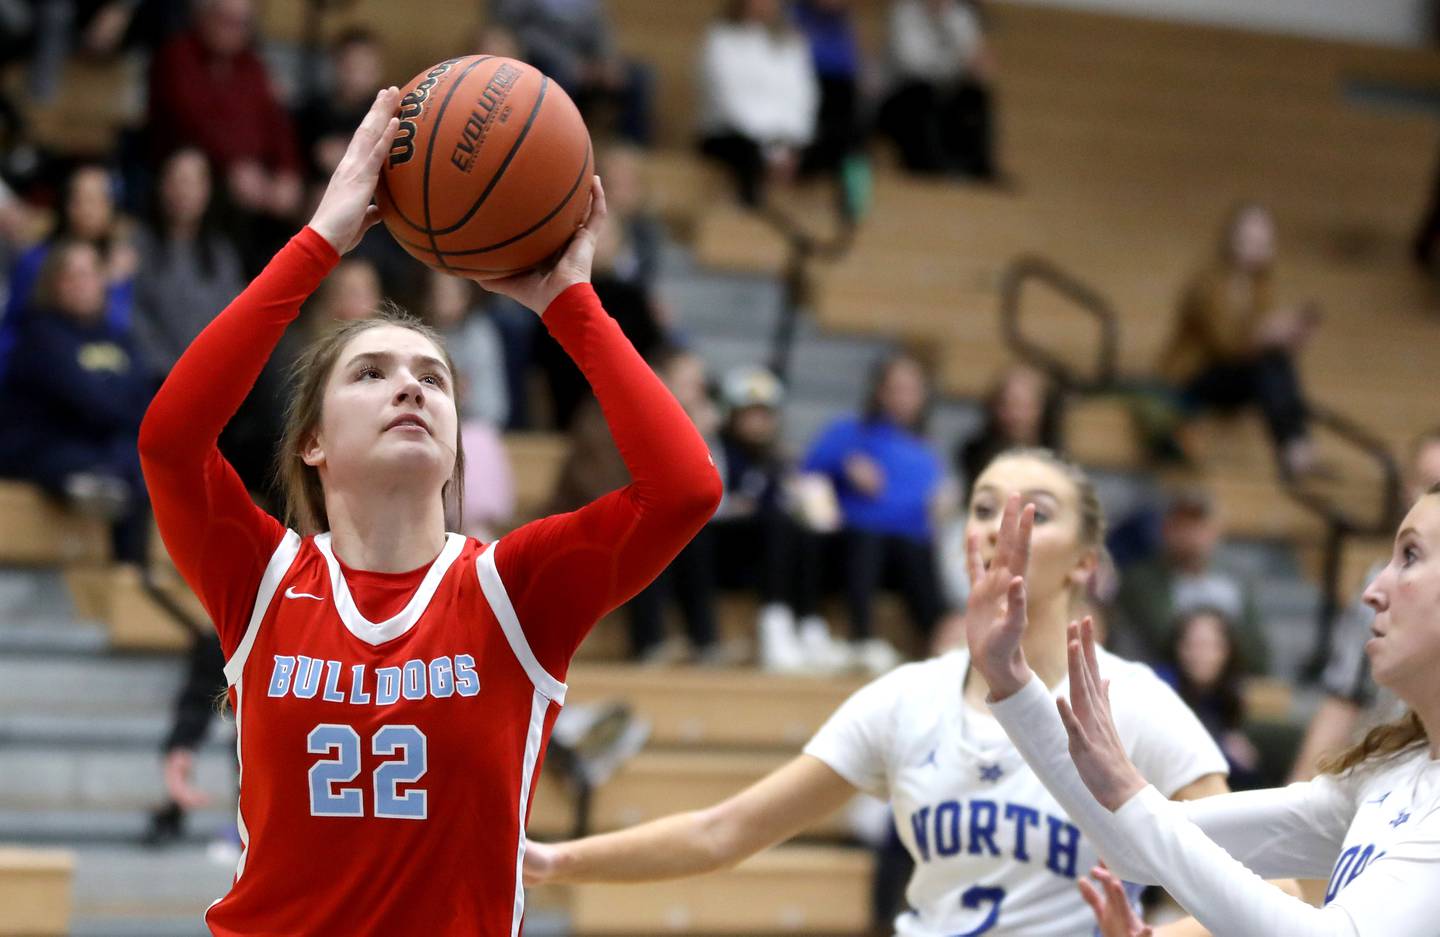 Batavia’s Ava Thomas shoots the ball during a game at St. Charles North on Tuesday, Feb. 7, 2023.